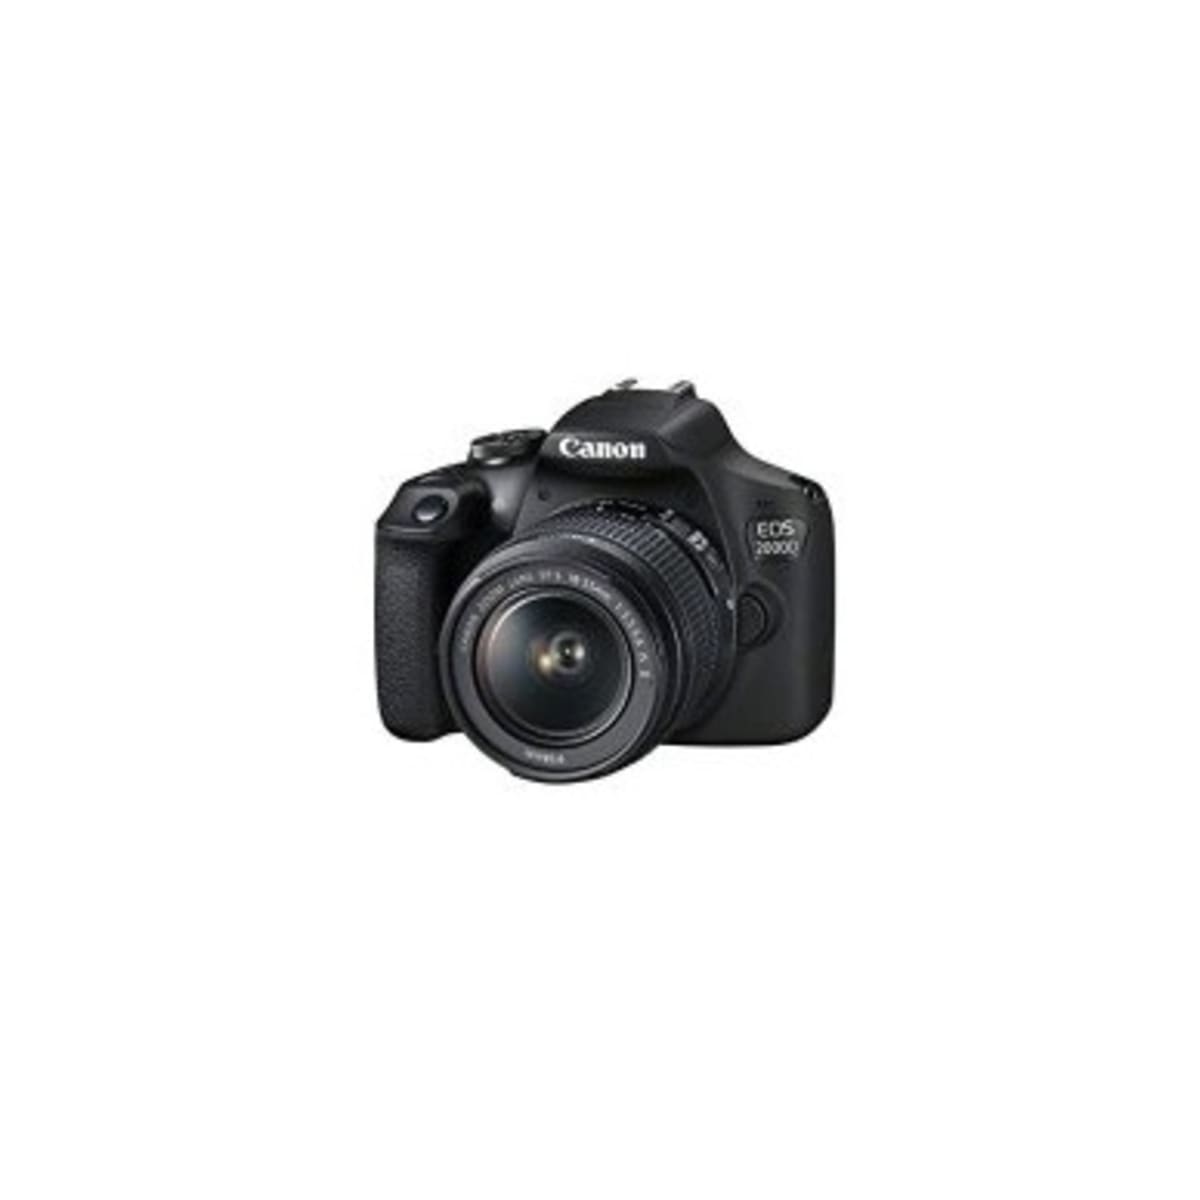 Canon EOS 2000D DSLR Camera with EF-S 18-55 mm f/3.5-5.6